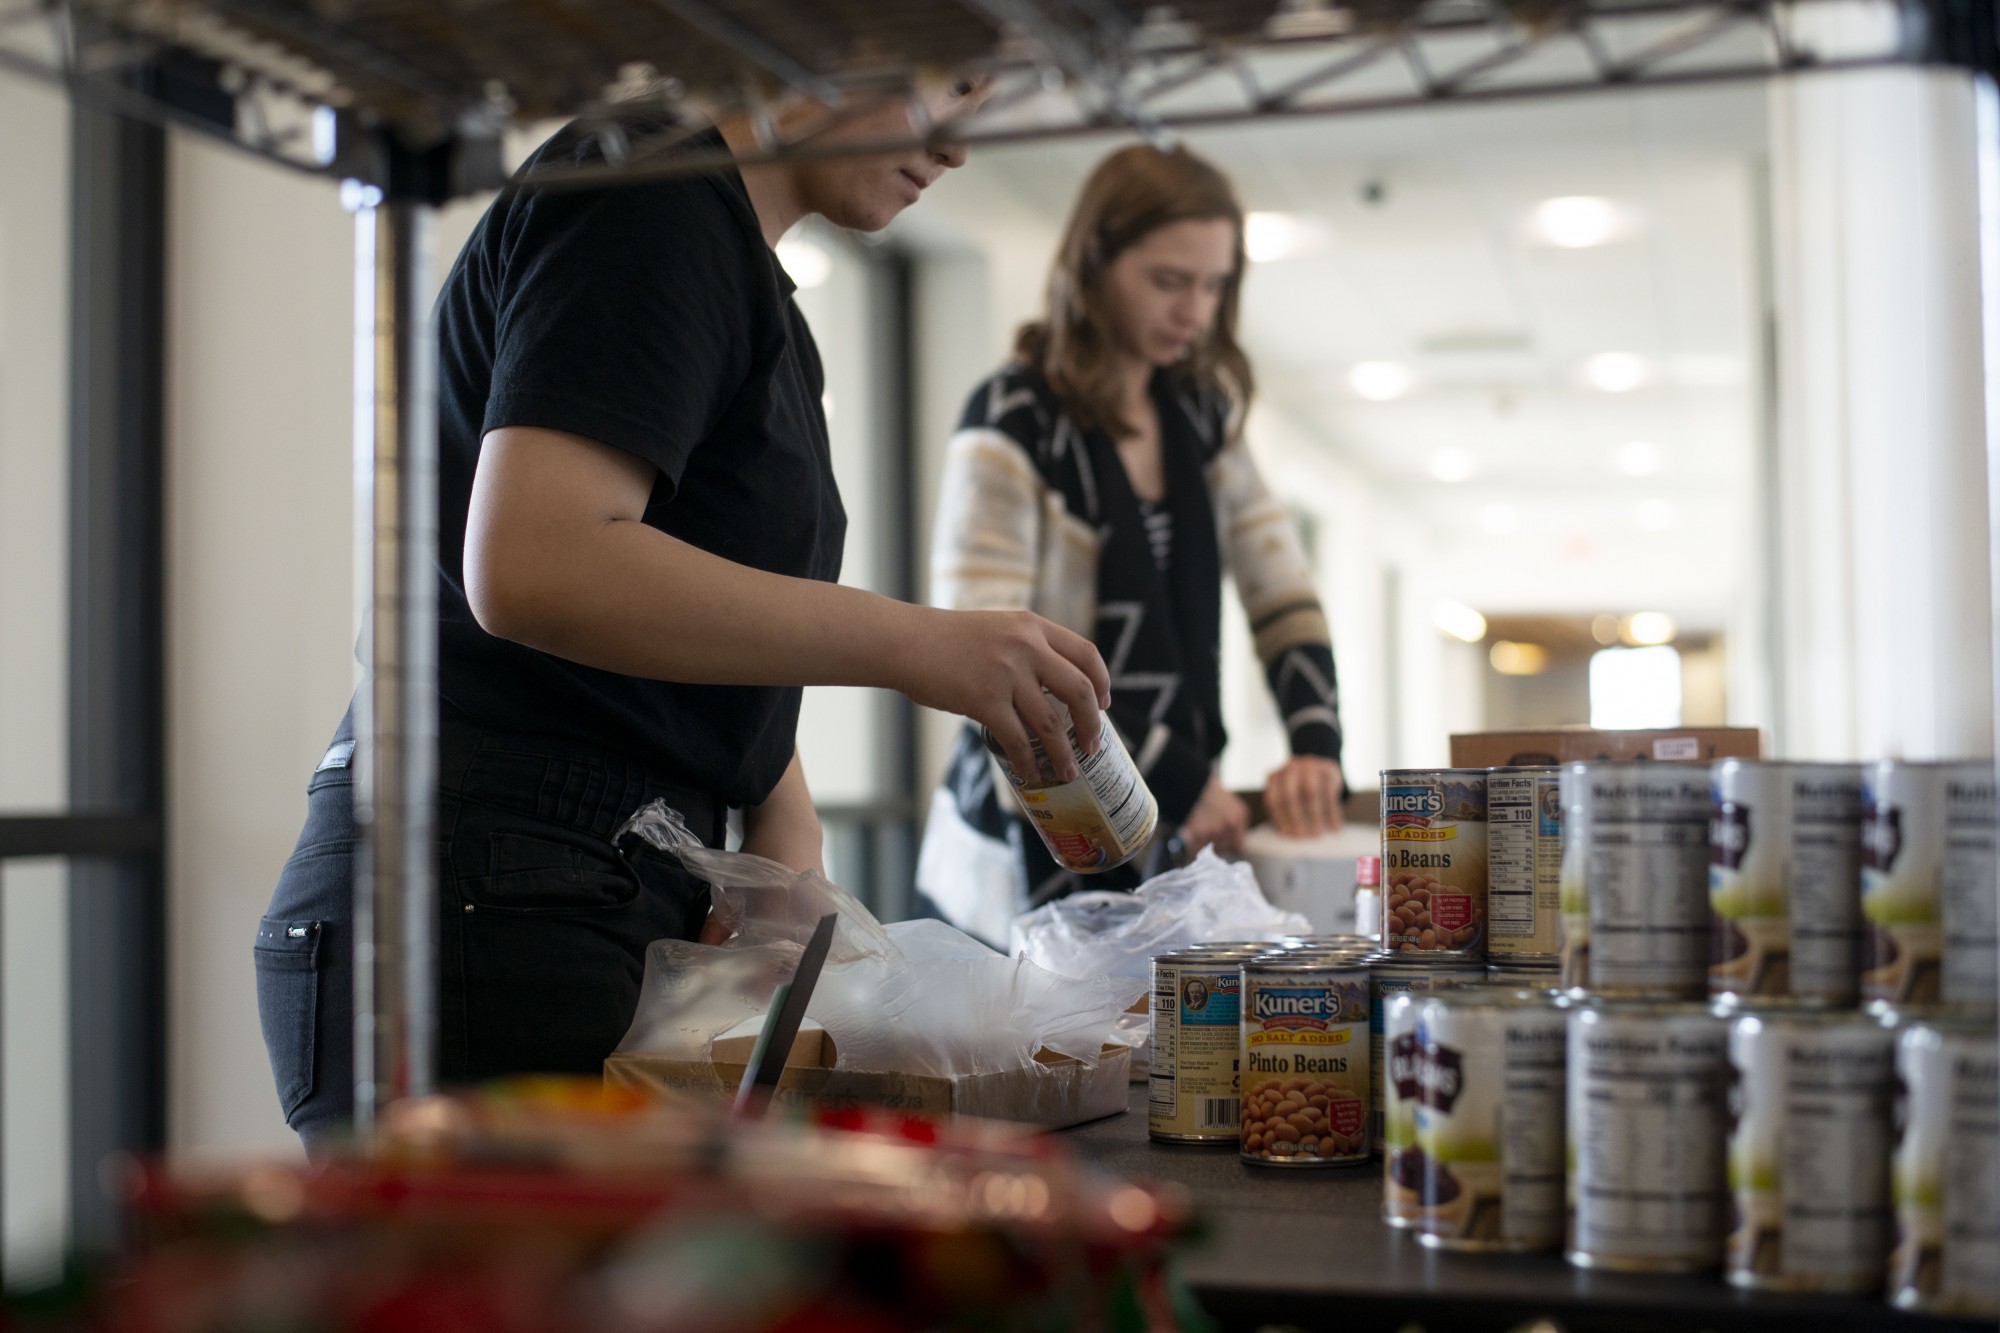 Volunteers Amber Chang, left, and Merri Bonde, right, prepare the Nutritious U Food Pantry to open in Coffman Union on Tuesday, Oct. 29. 